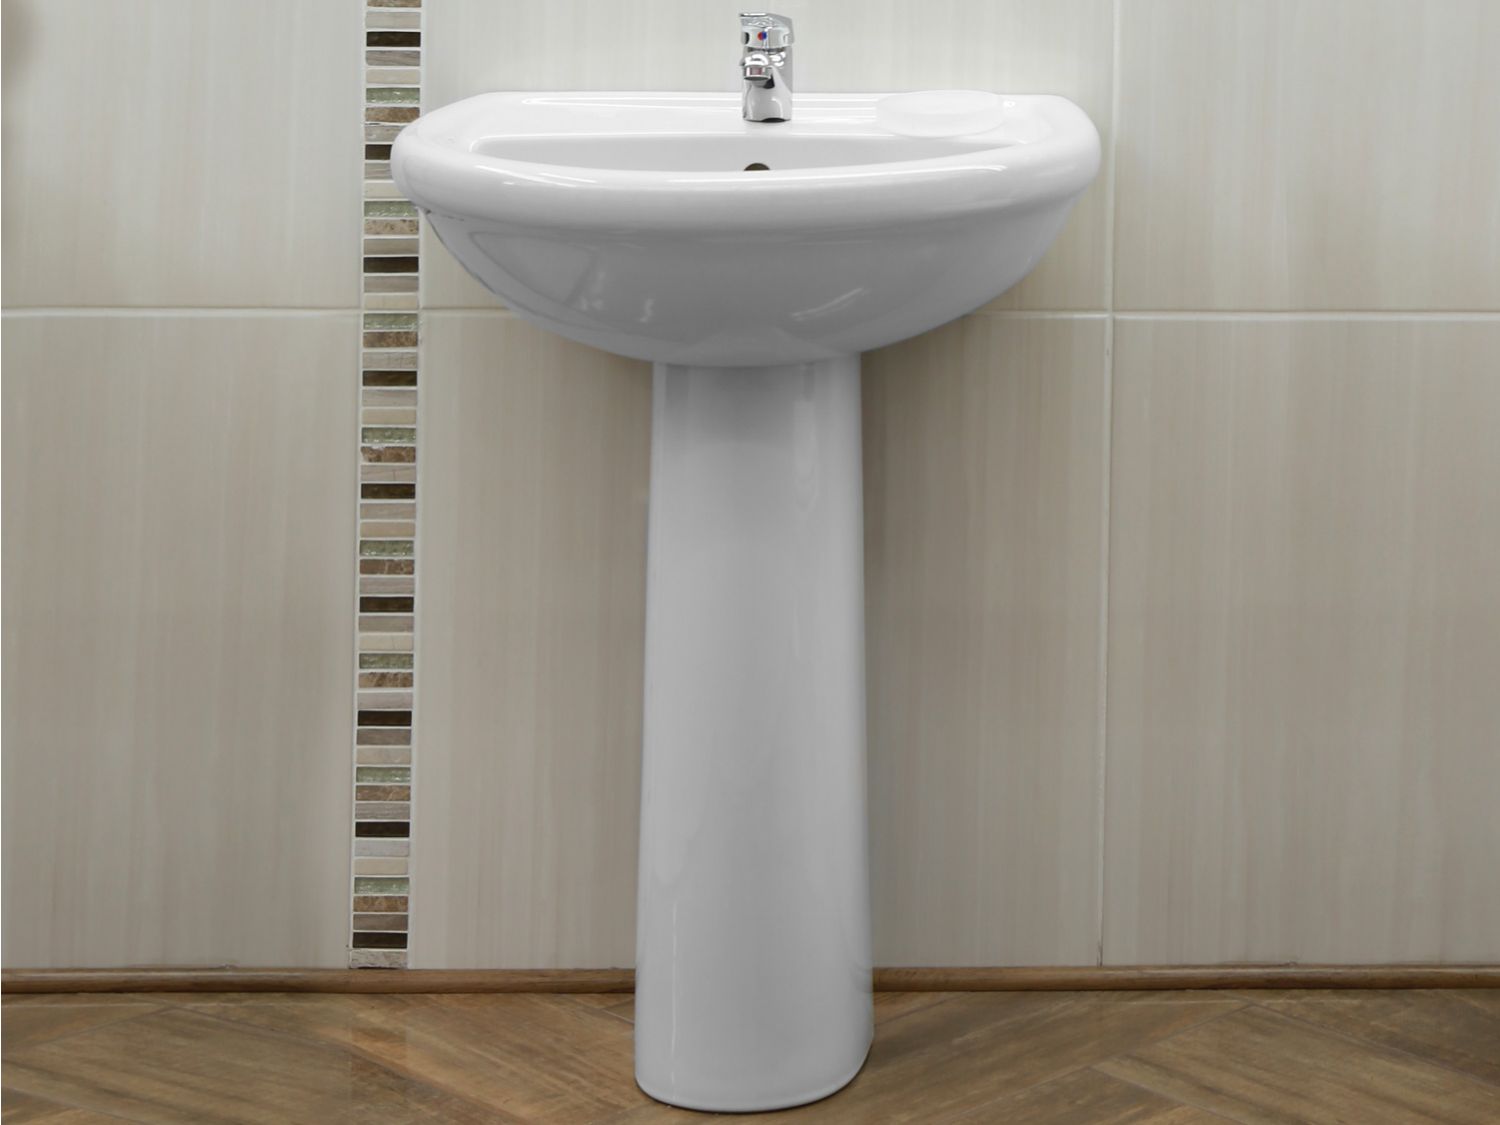 Coral White Wall Mounted Basin  Floor Pedestal Set 570 x 465 x 180mm